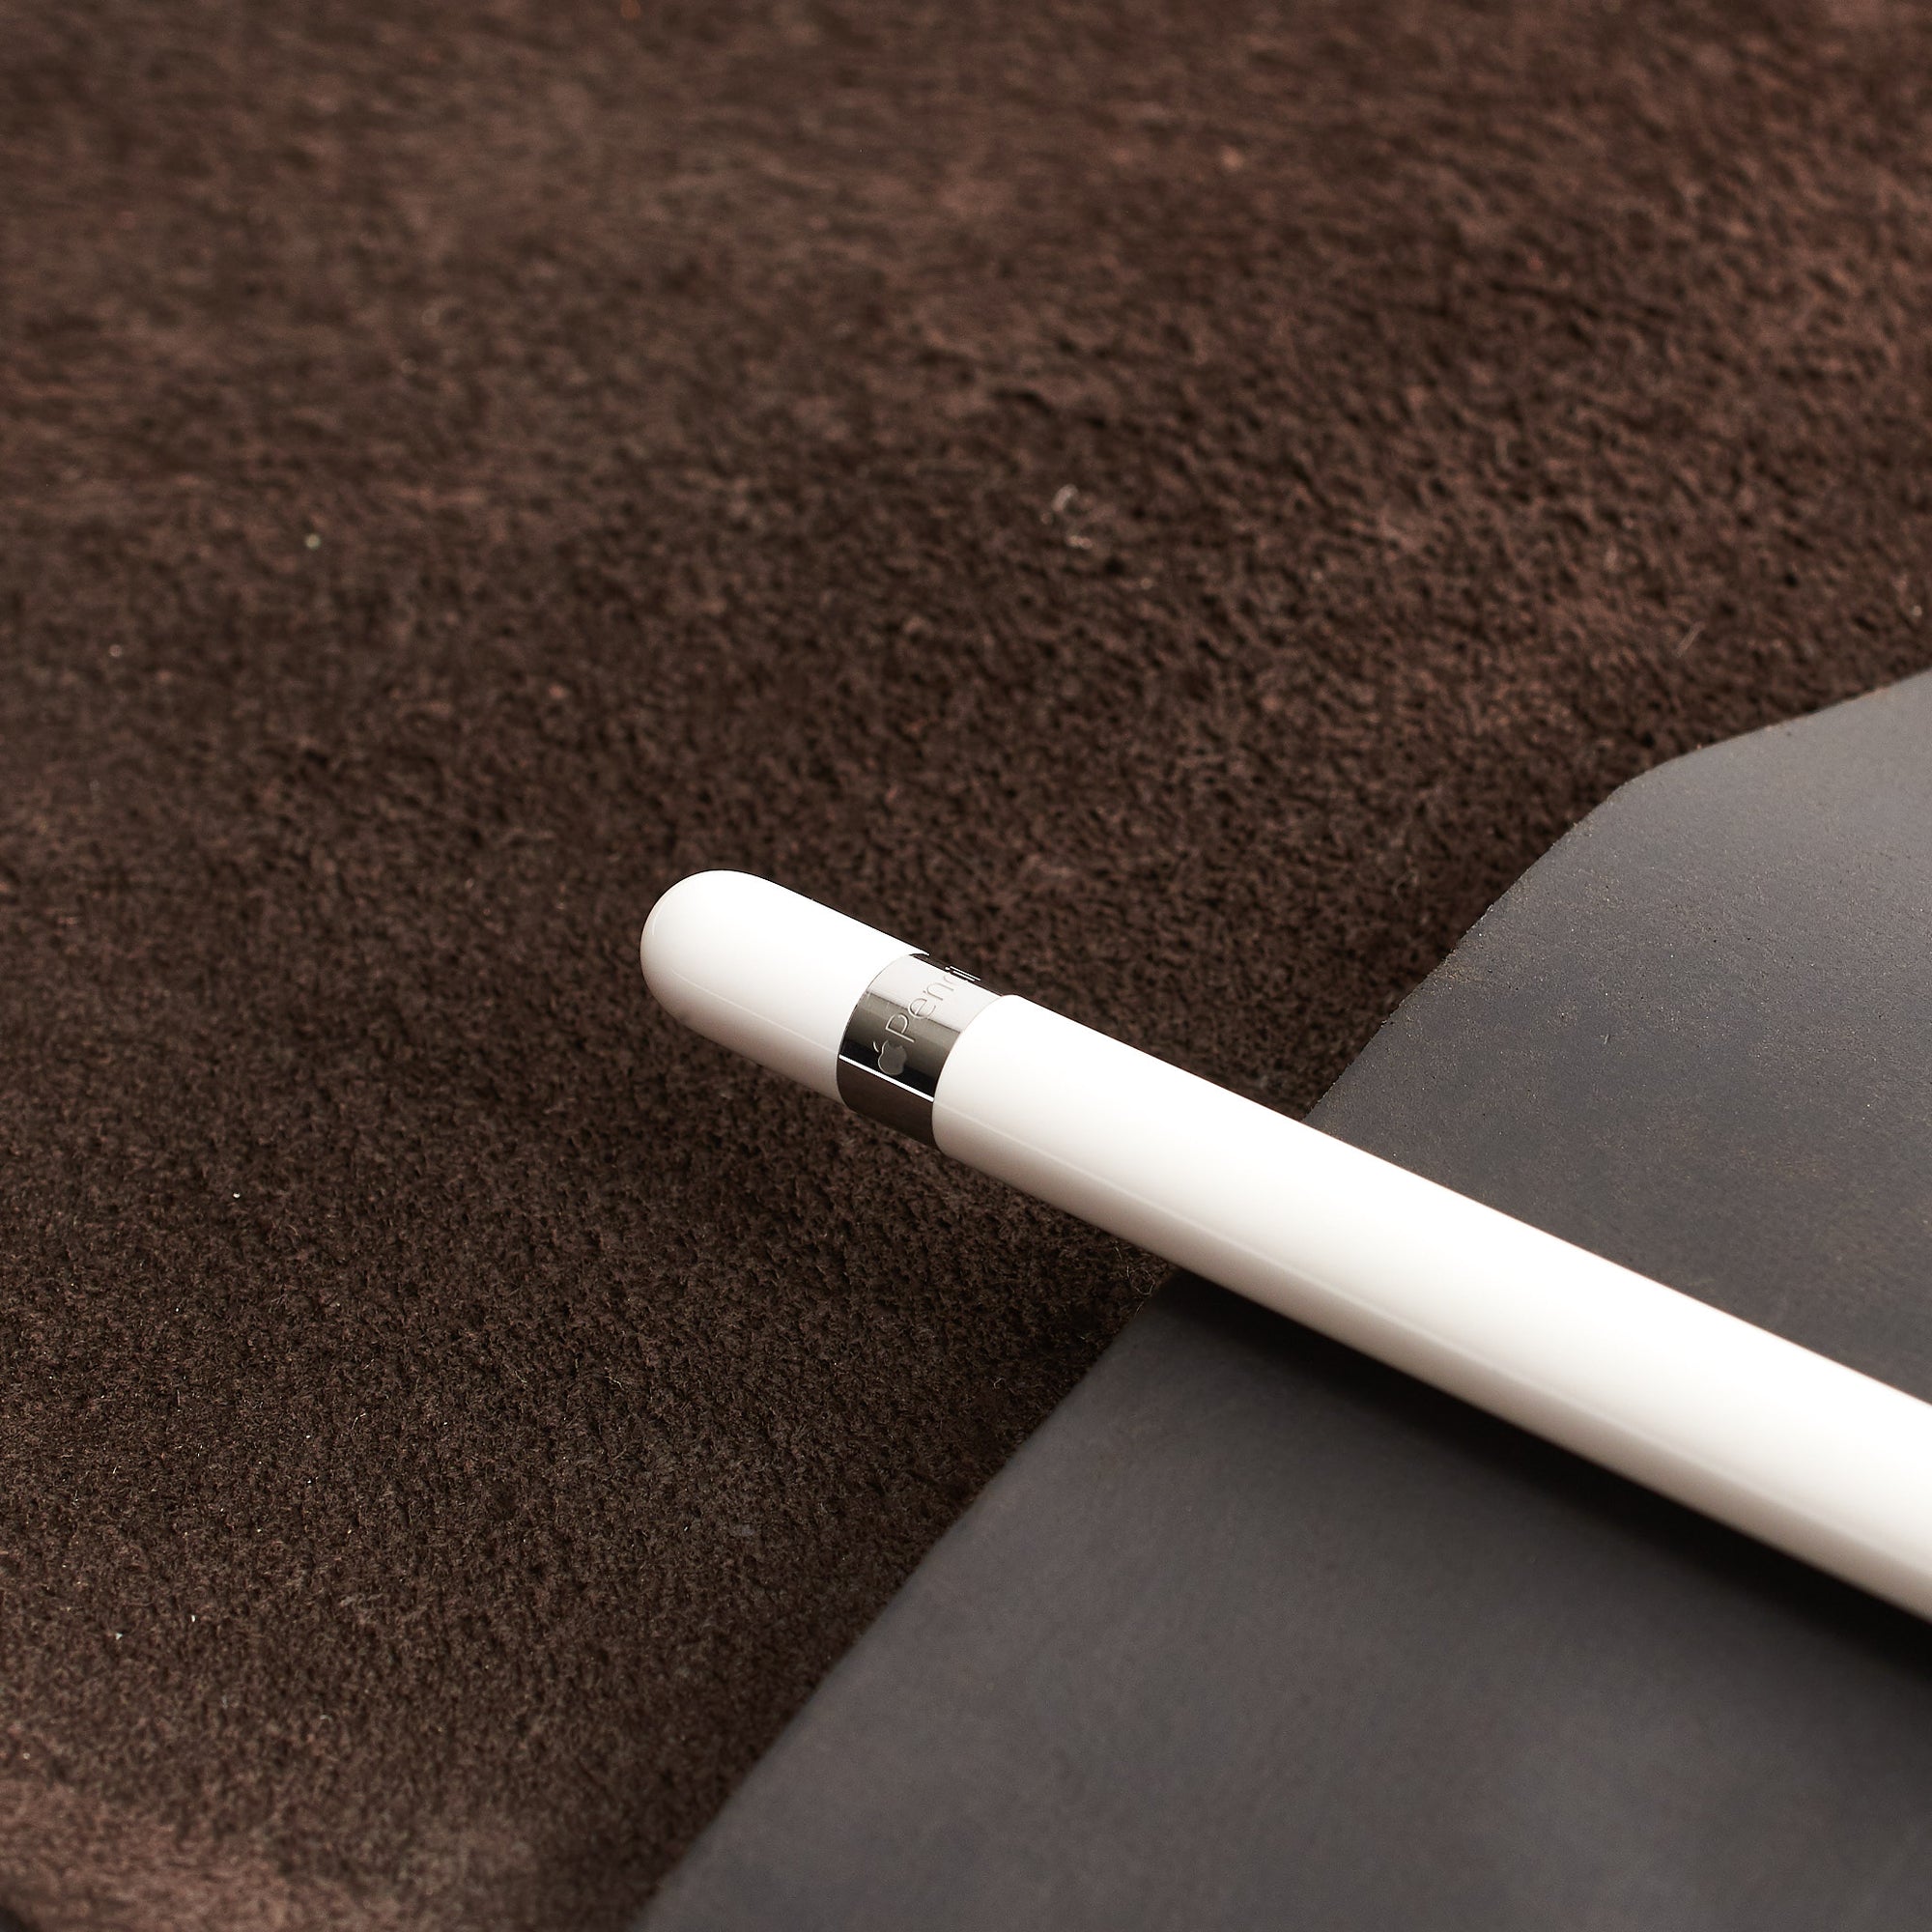 Apple Pencil Detail. iPad Sleeve. iPad Leather Case Brown With Apple Pencil Holder by Capra Leather